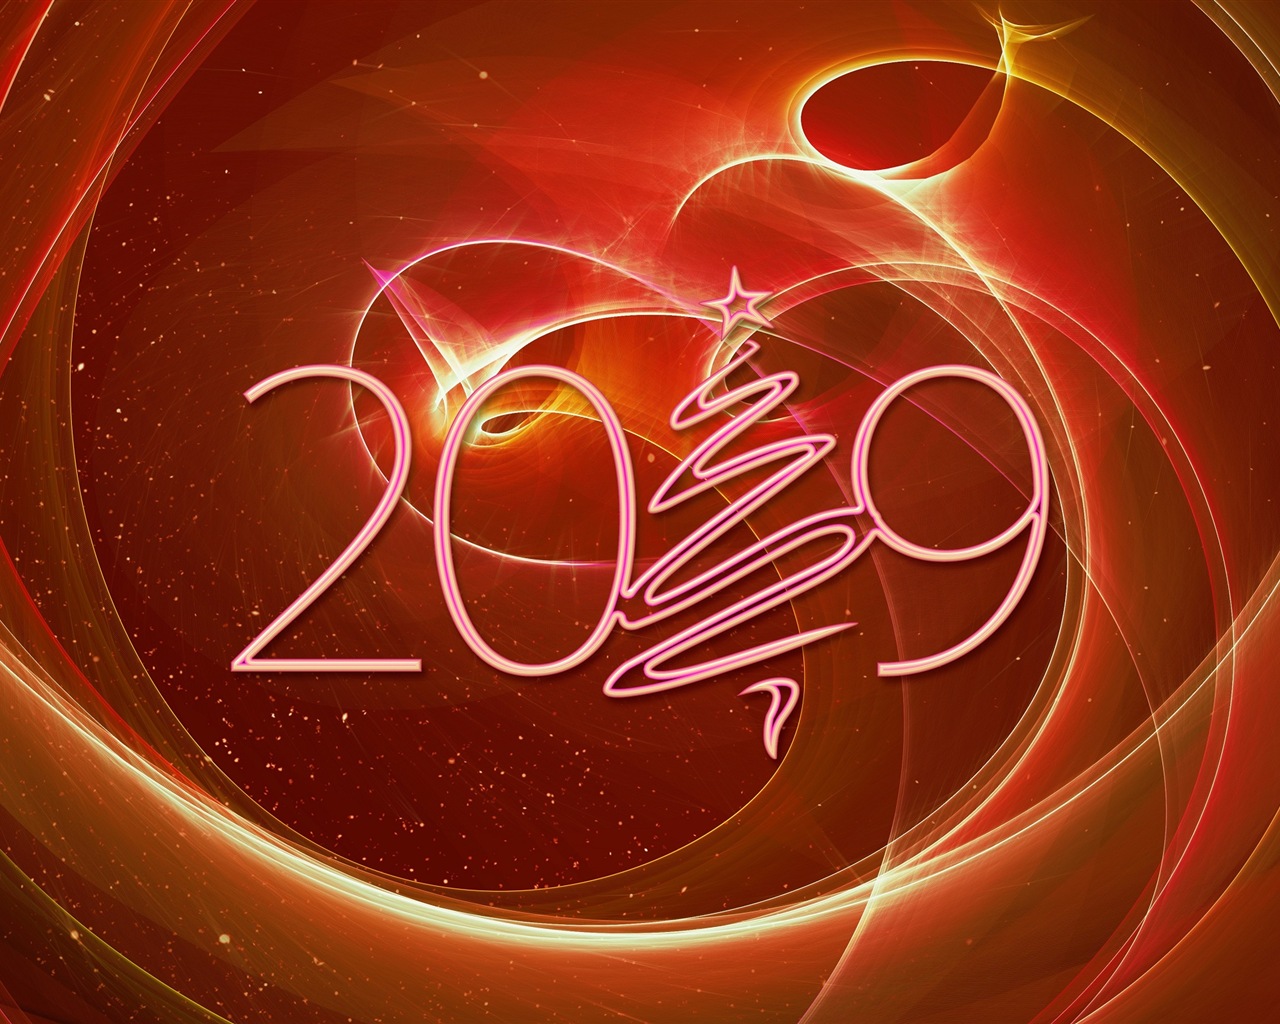 Happy New Year 2019 HD wallpapers #4 - 1280x1024